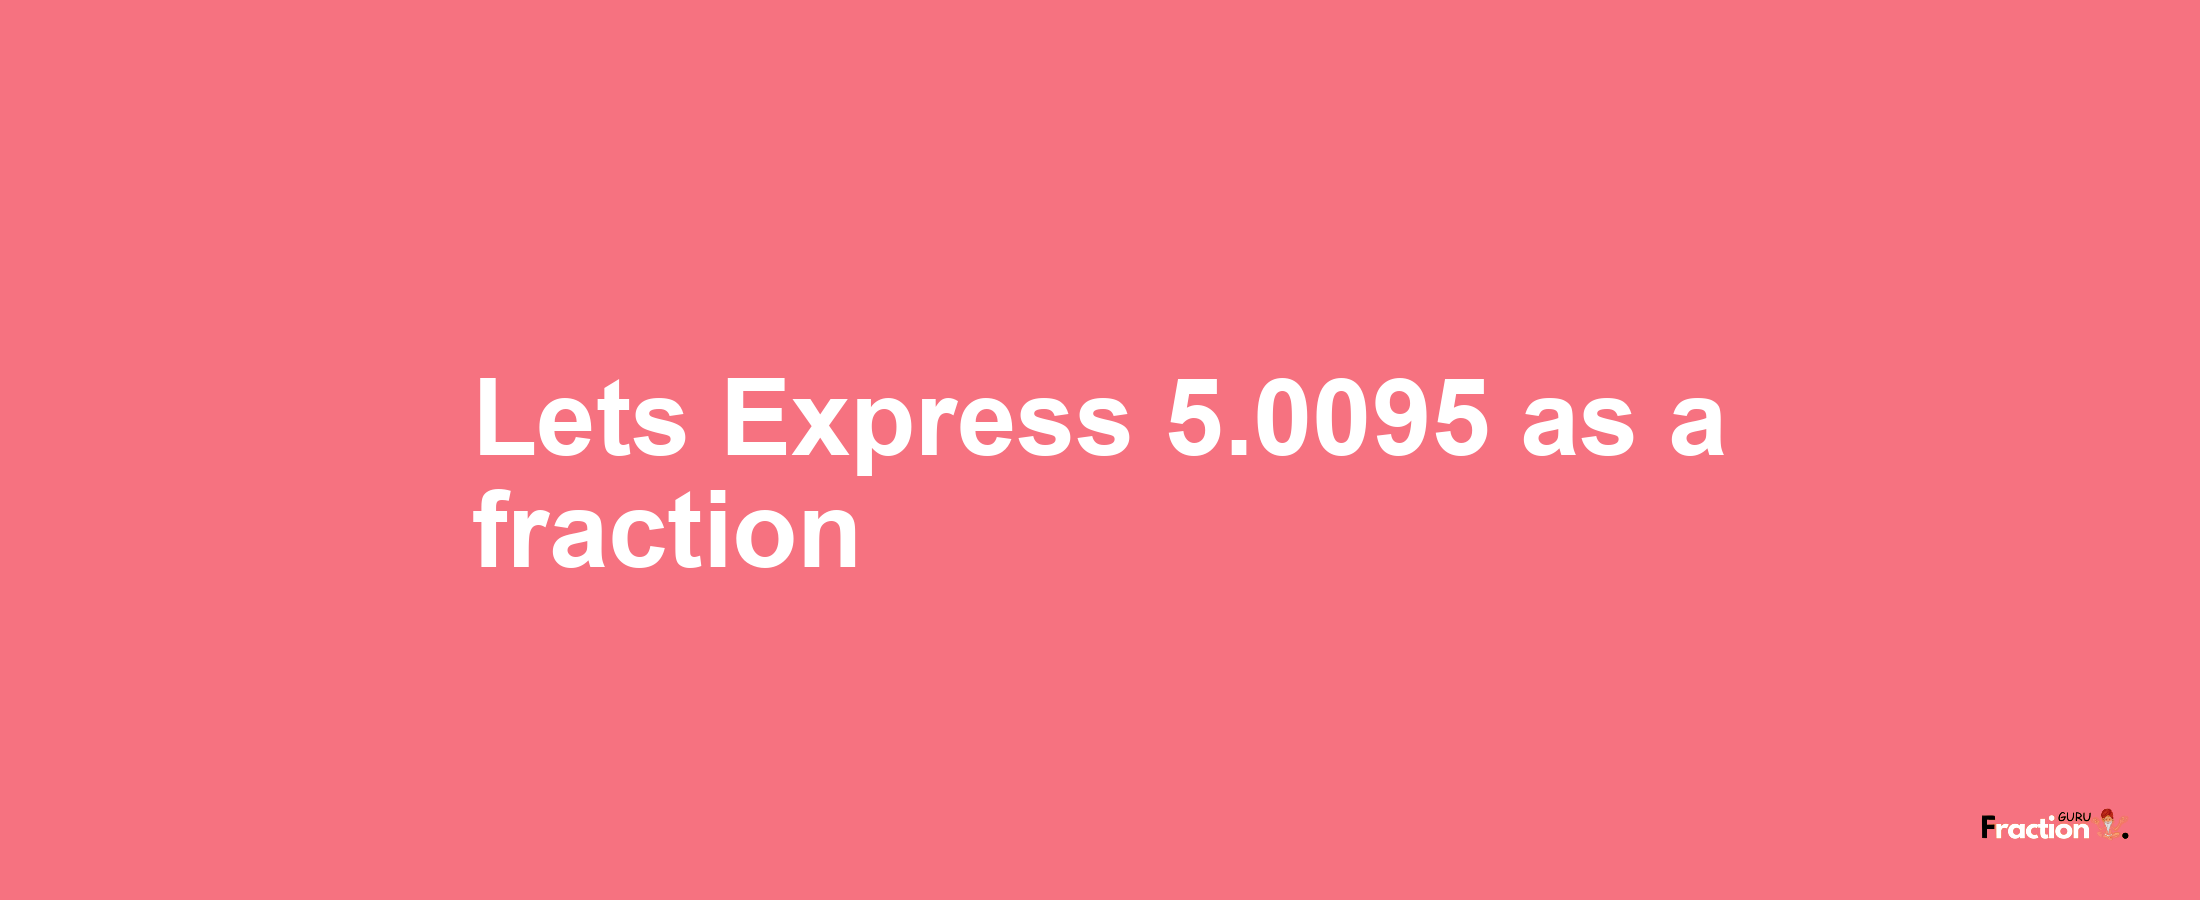 Lets Express 5.0095 as afraction